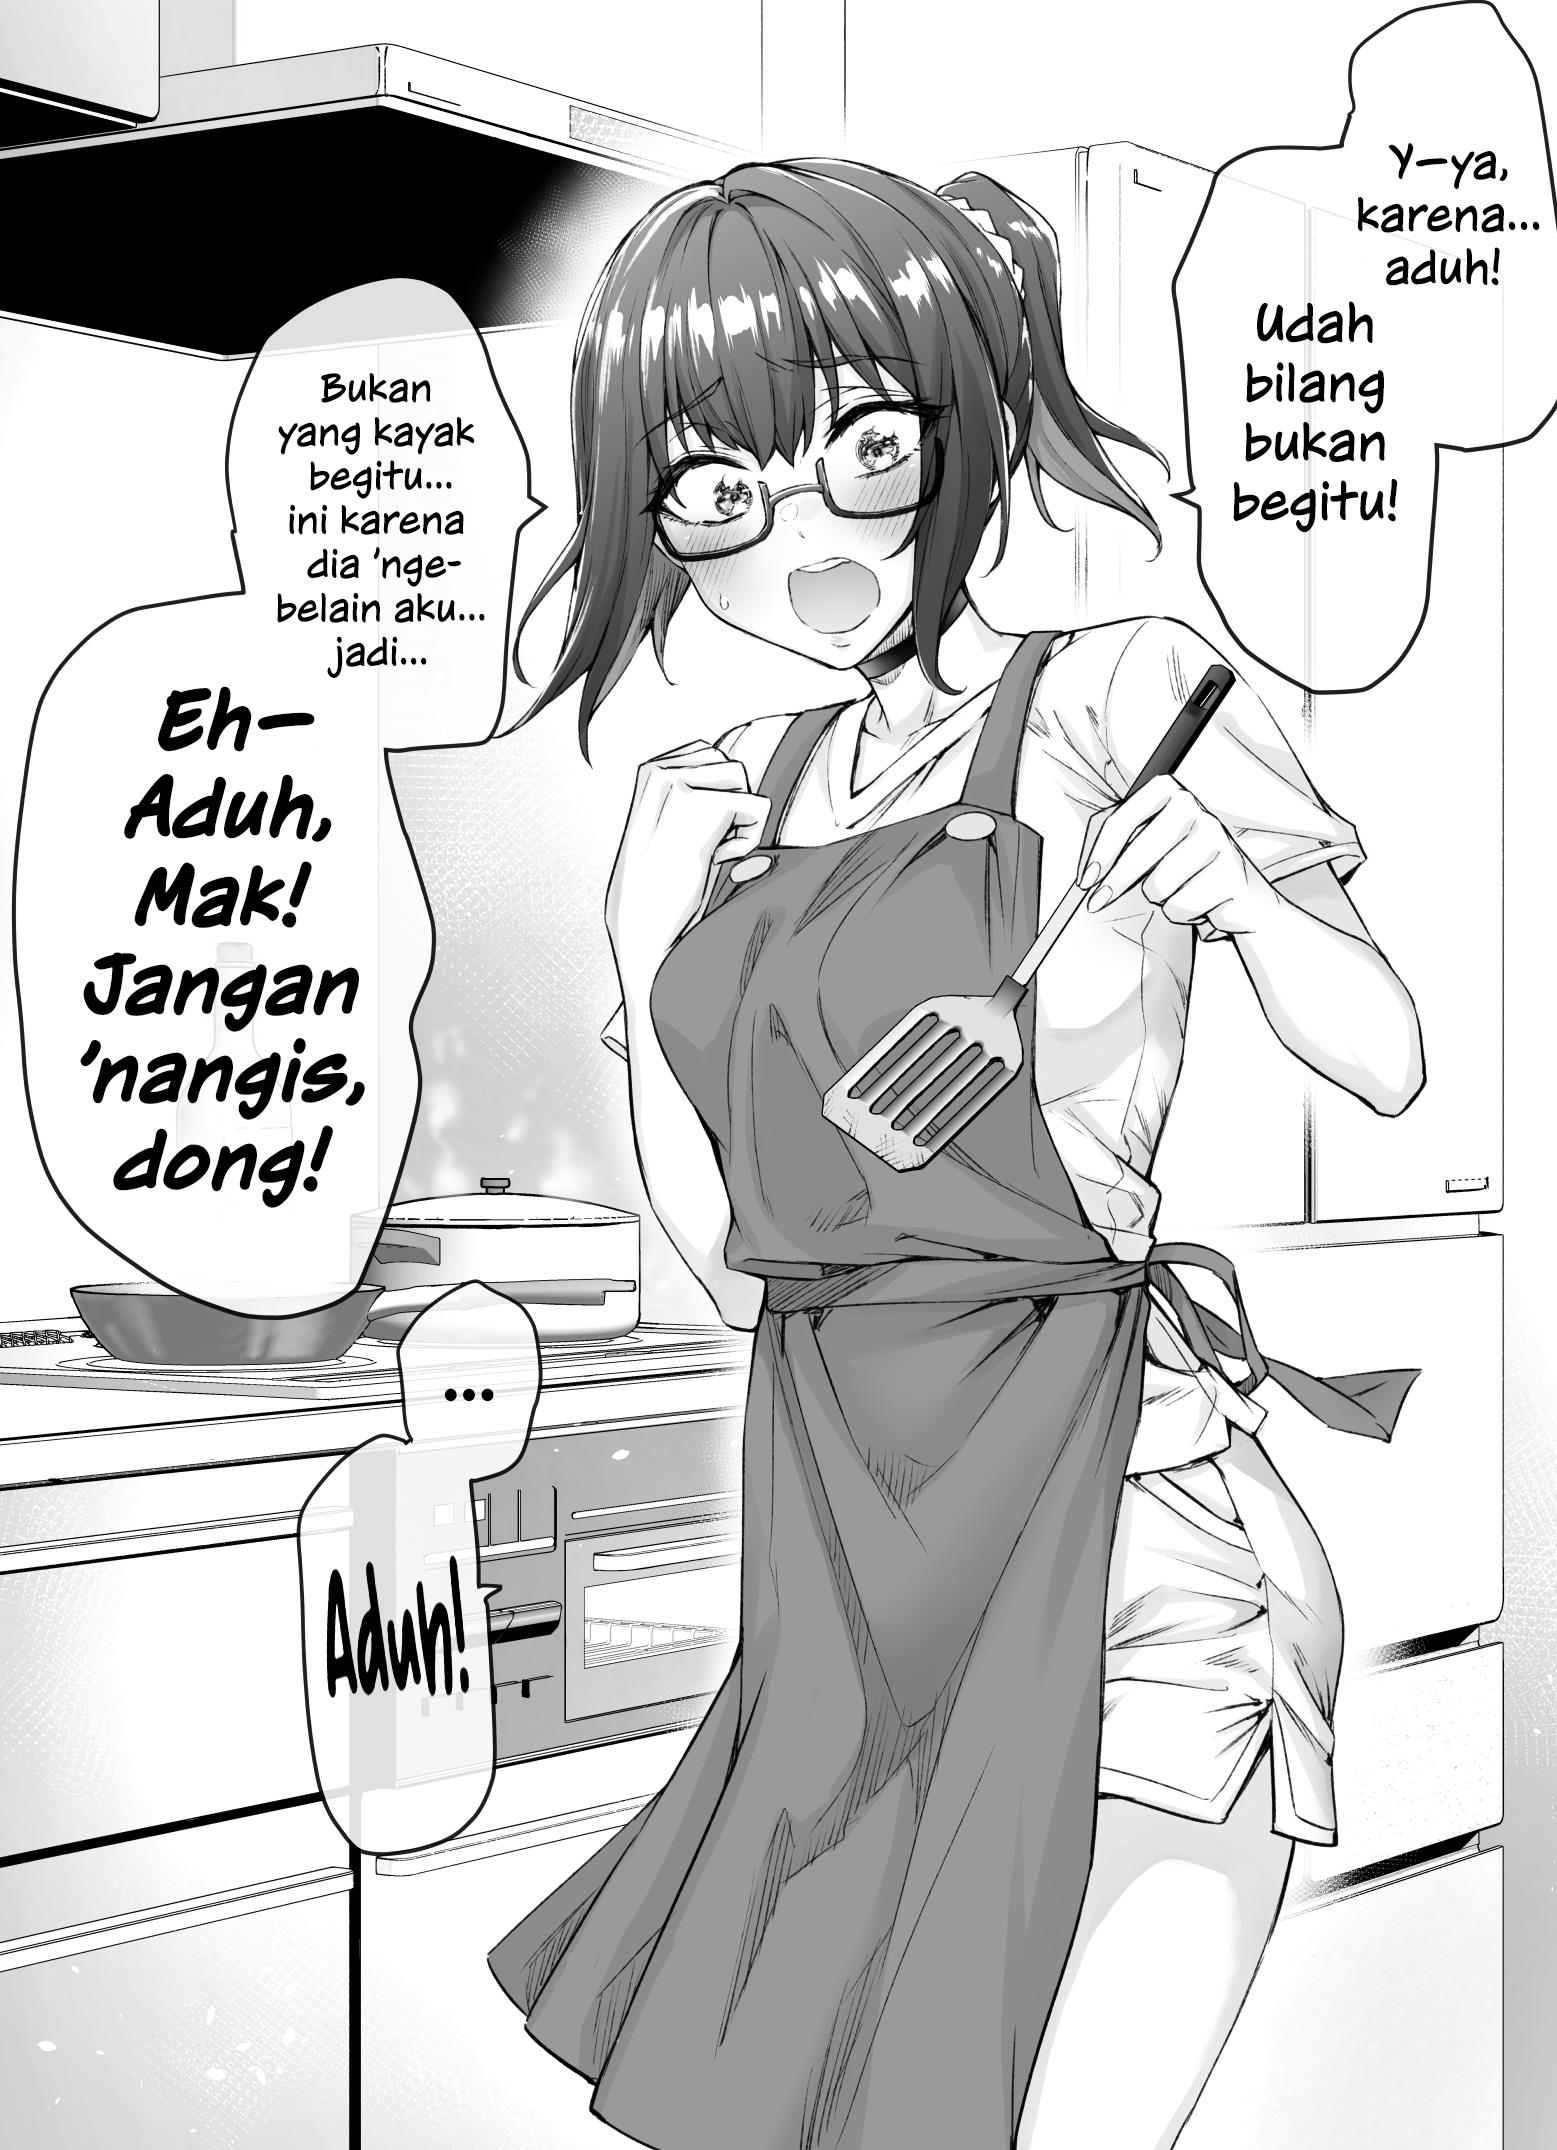 The Tsuntsuntsuntsuntsuntsun tsuntsuntsuntsuntsundere Girl Getting Less and Less Tsun Day by Day Chapter 16.2